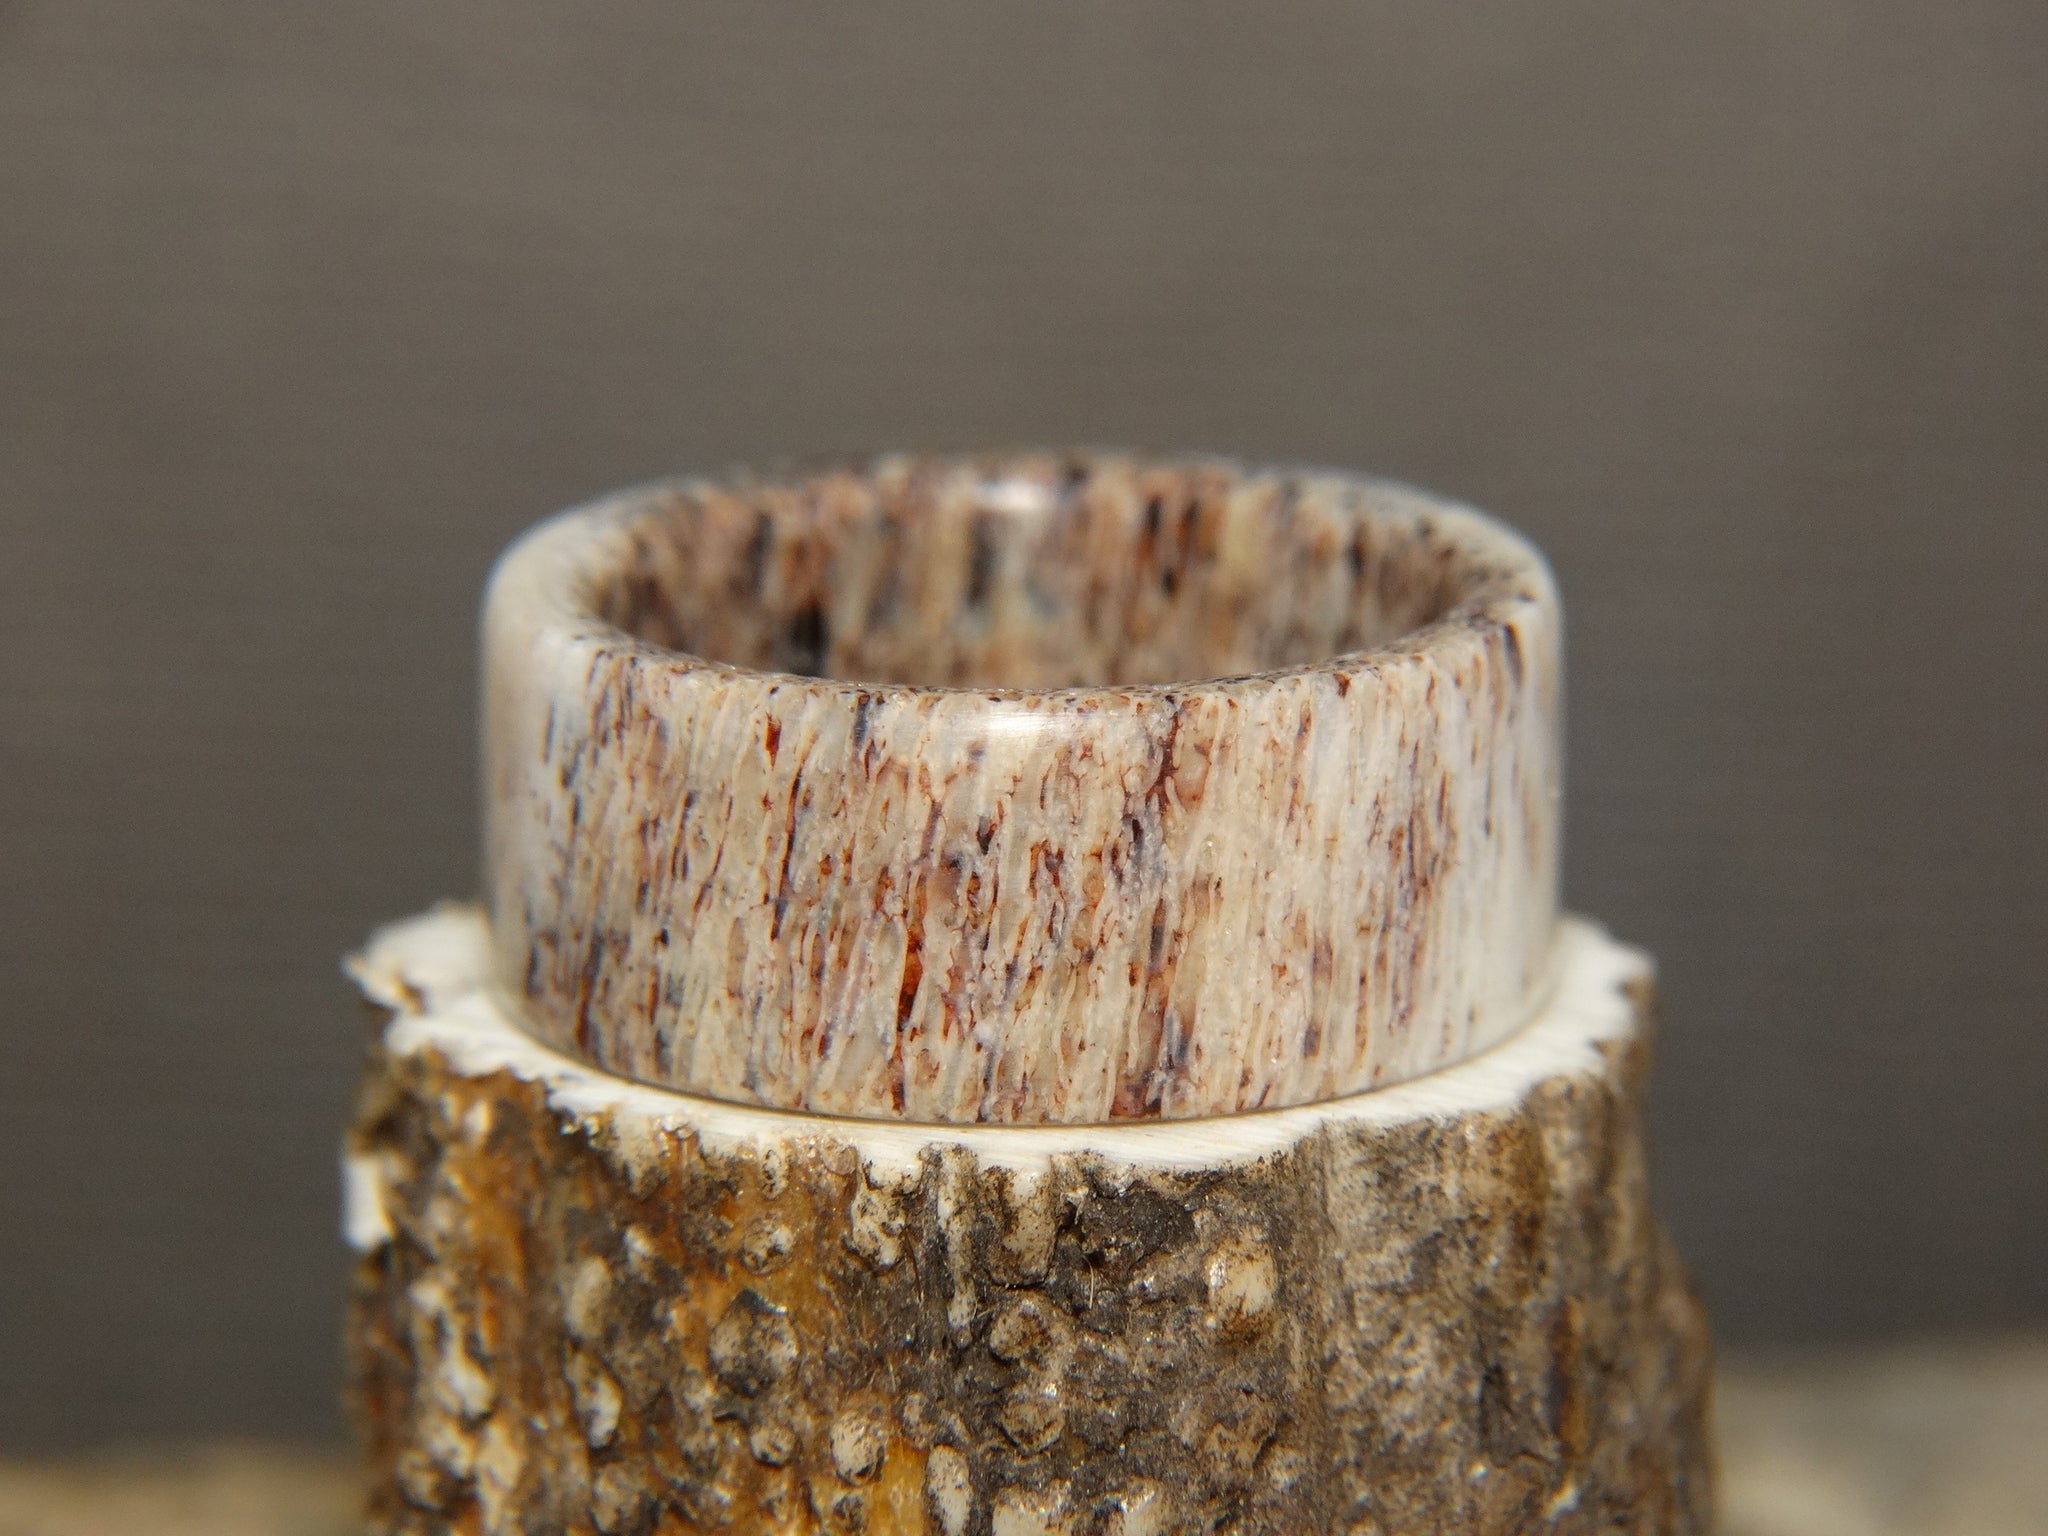 Antler Ring - "Natural" Deer Antler: All my antler rings are hand made and stabilized adding waterproof protection and durability for a truly unique and one-of-a-kind ring.